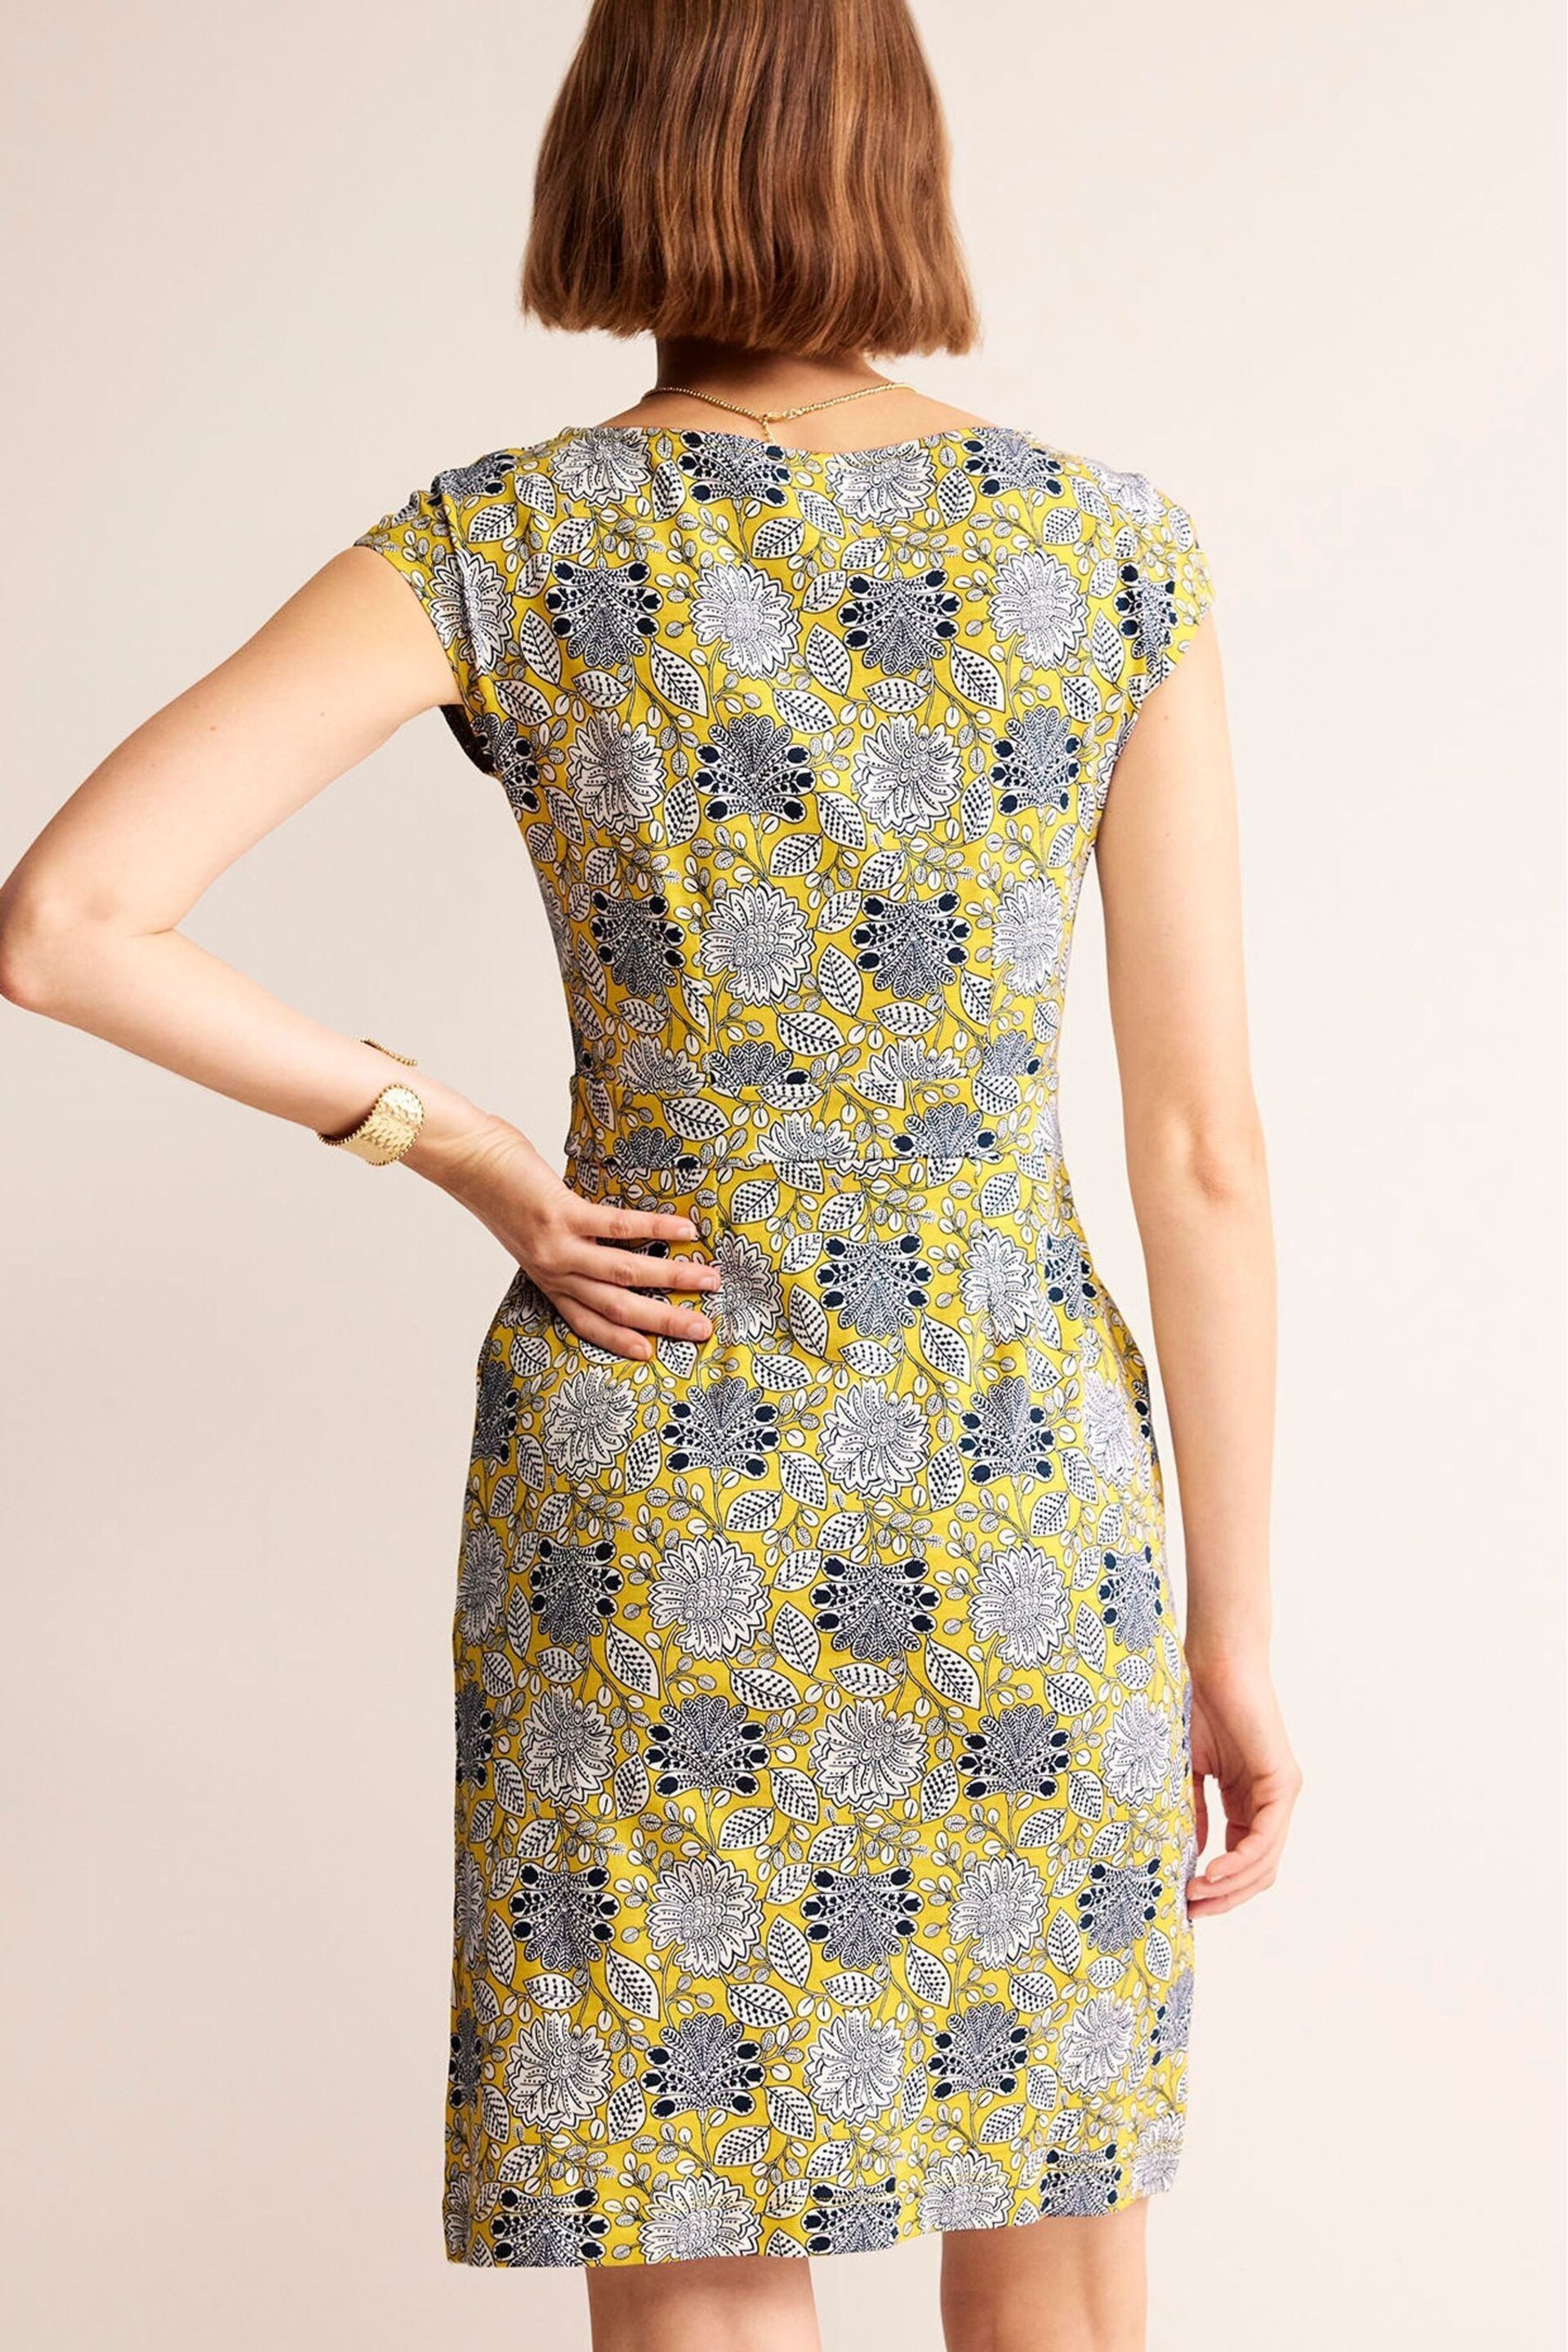 Boden Yellow Petite Florrie Jersey Dress - Image 2 of 5